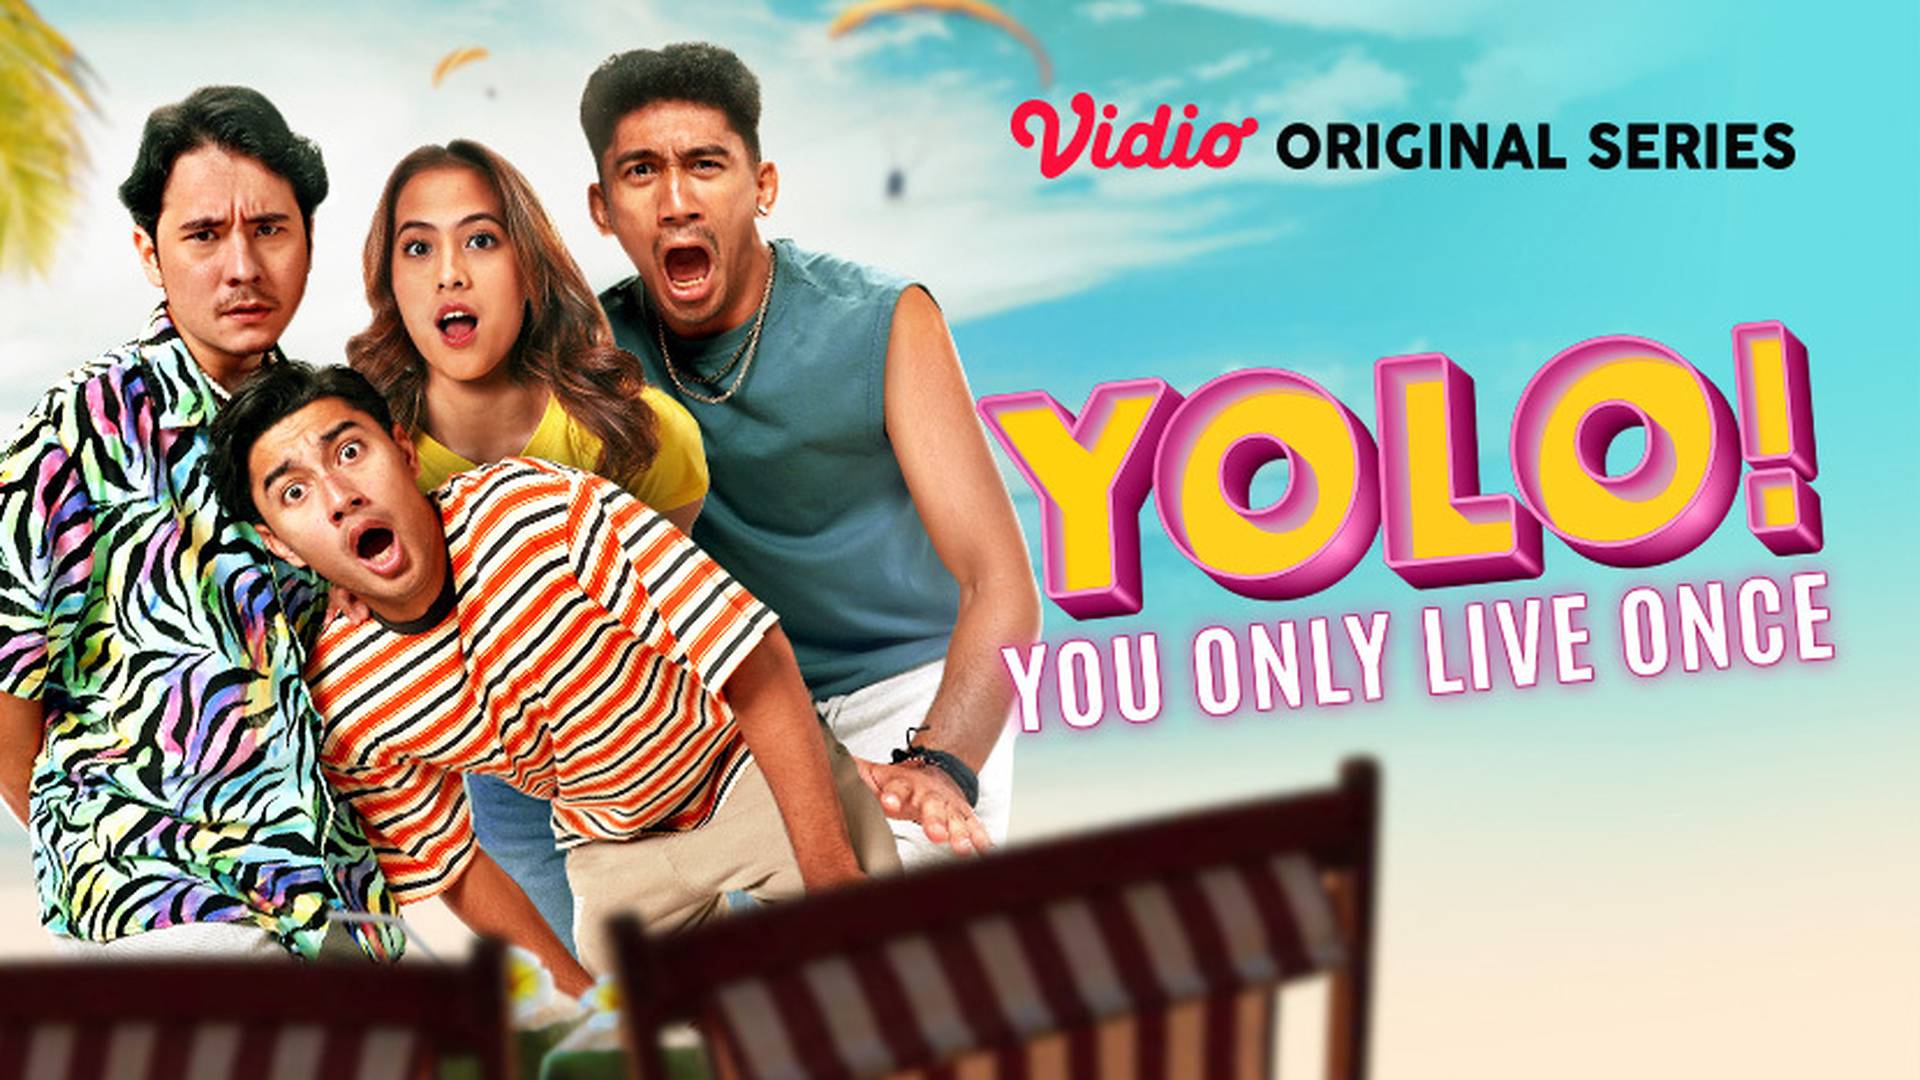 YOLO You Only Live Once. - ppt video online download